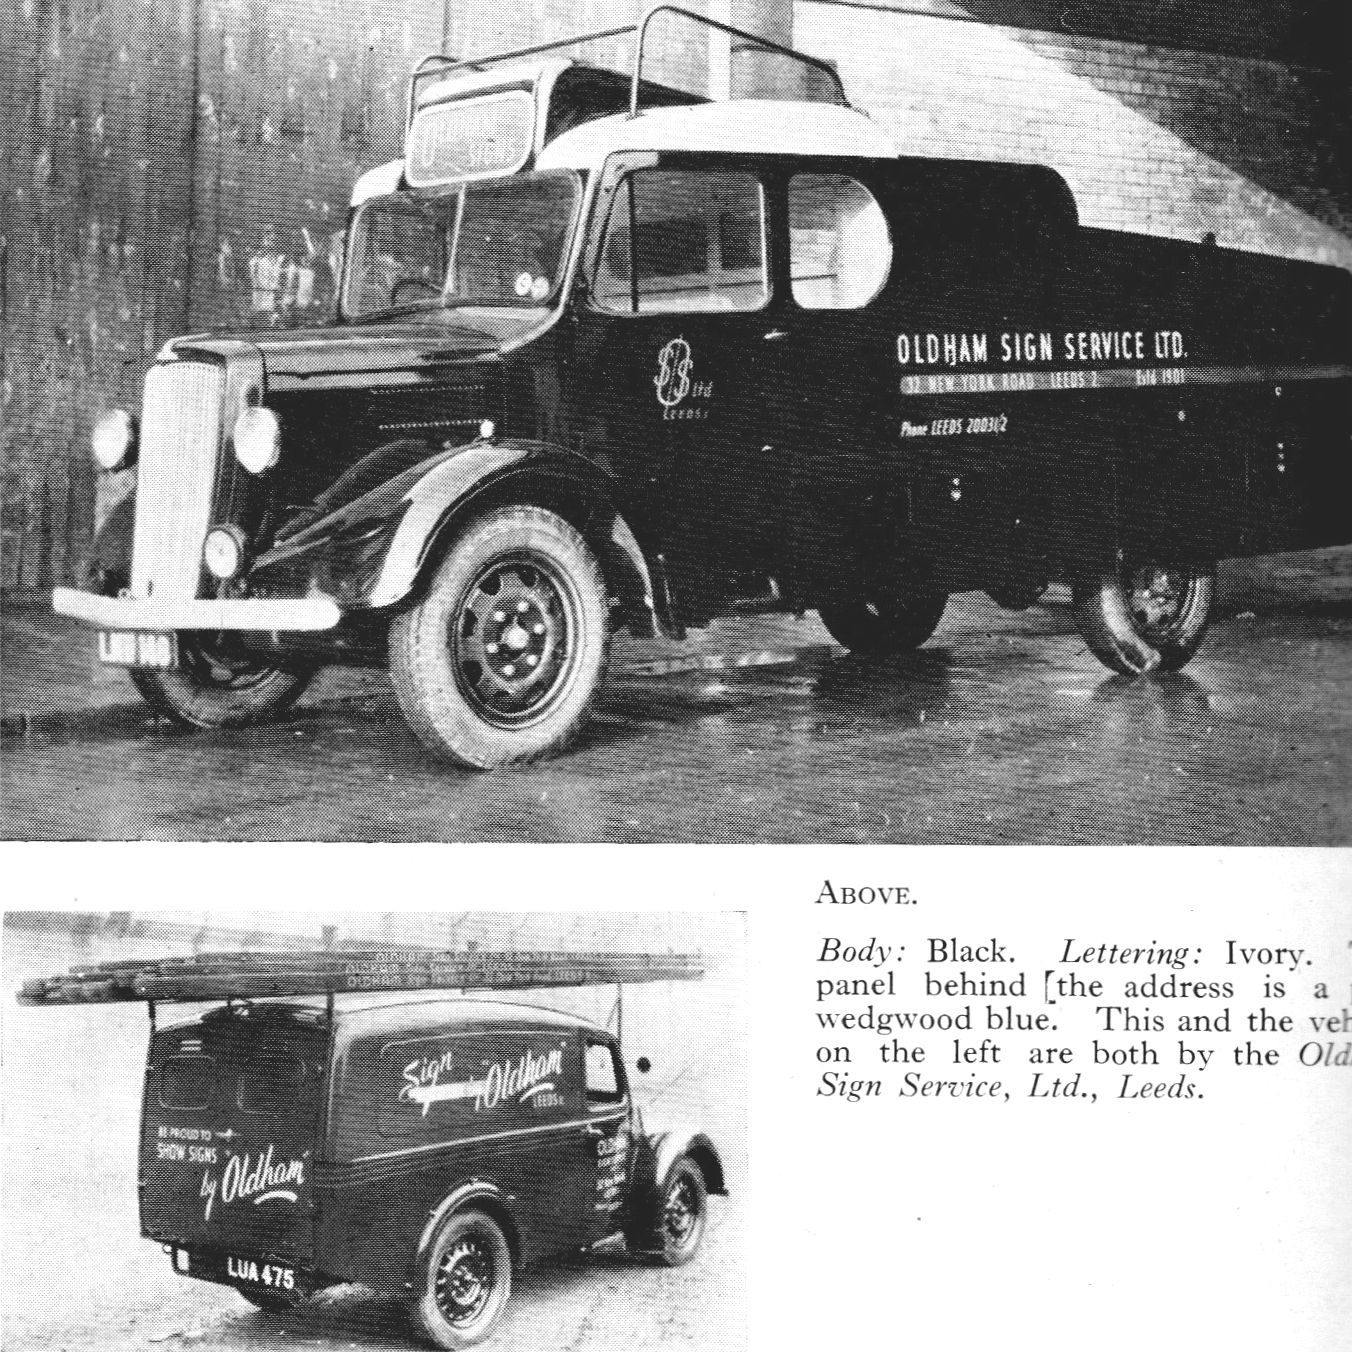 Page from a book showing hand-painted vehicles.